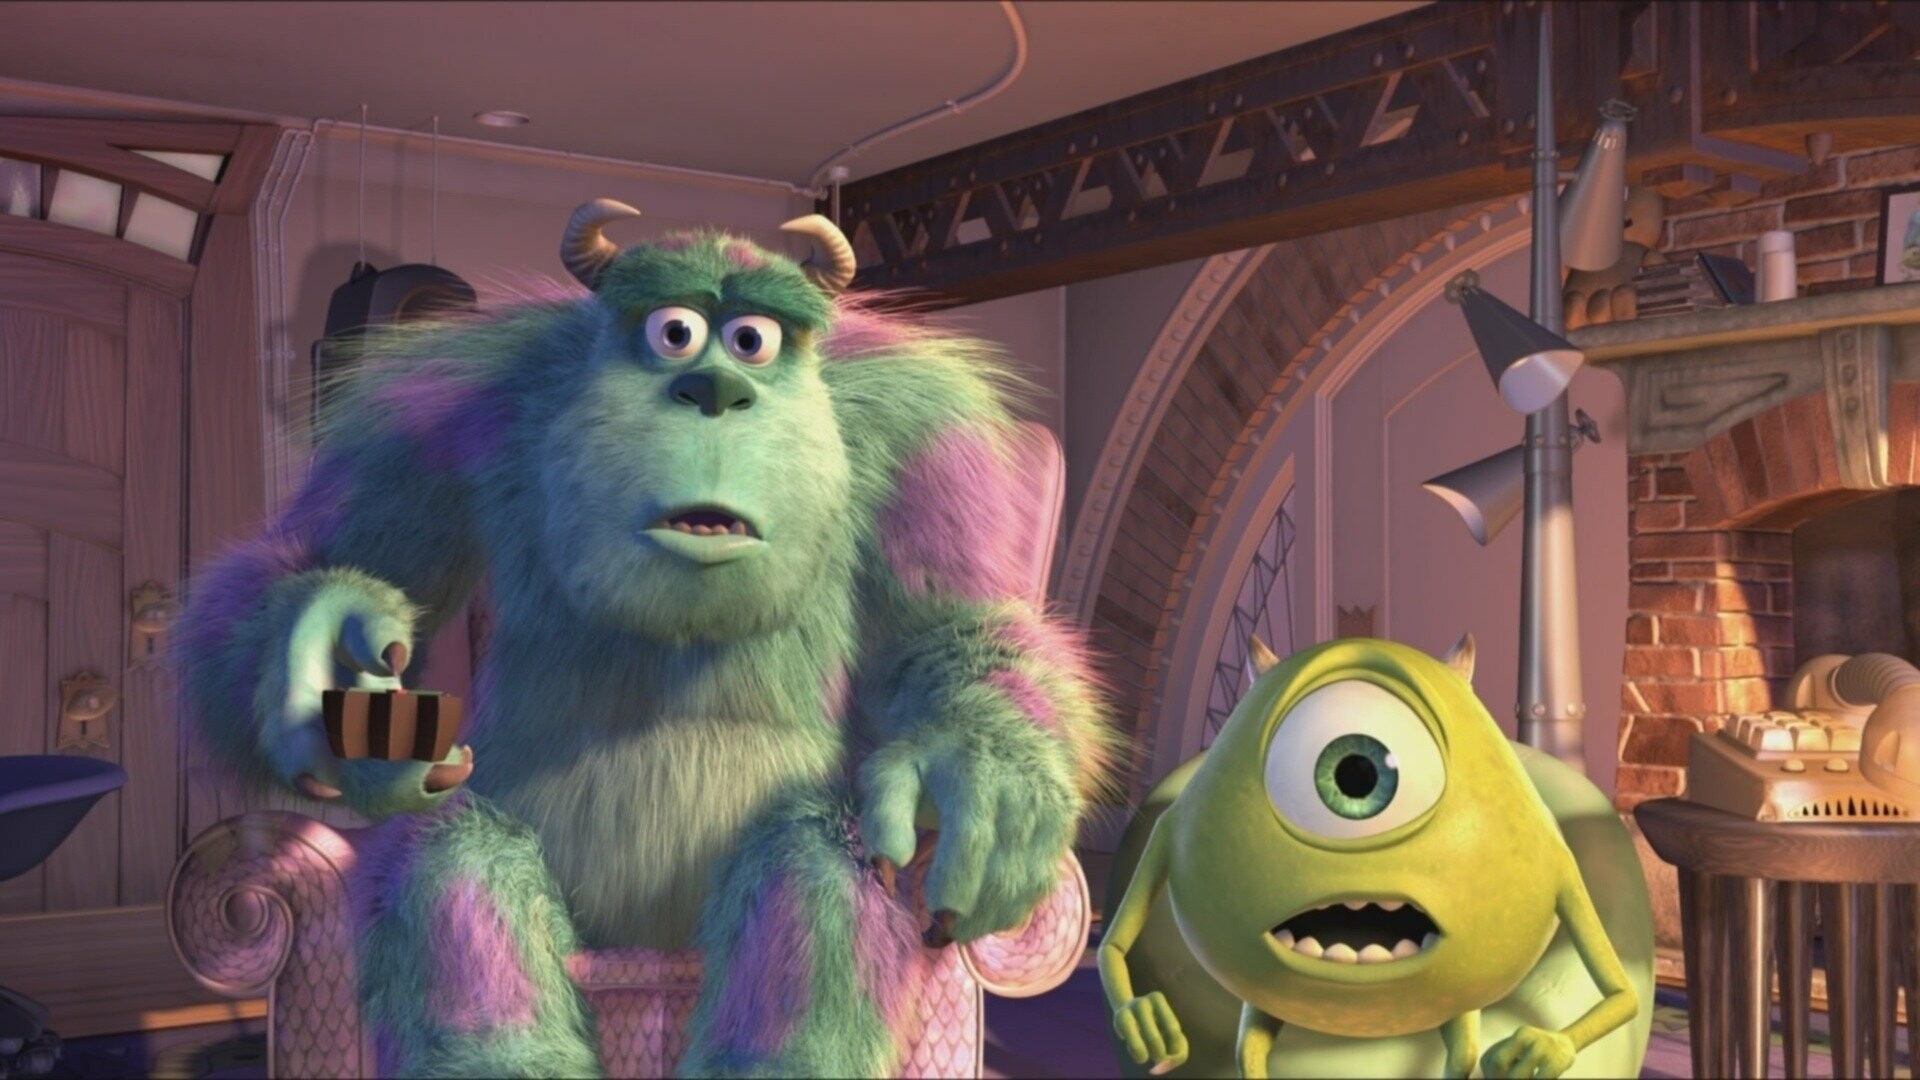 Monsters, Inc., Cartoon characters, Playful backgrounds, Animated film, 1920x1080 Full HD Desktop